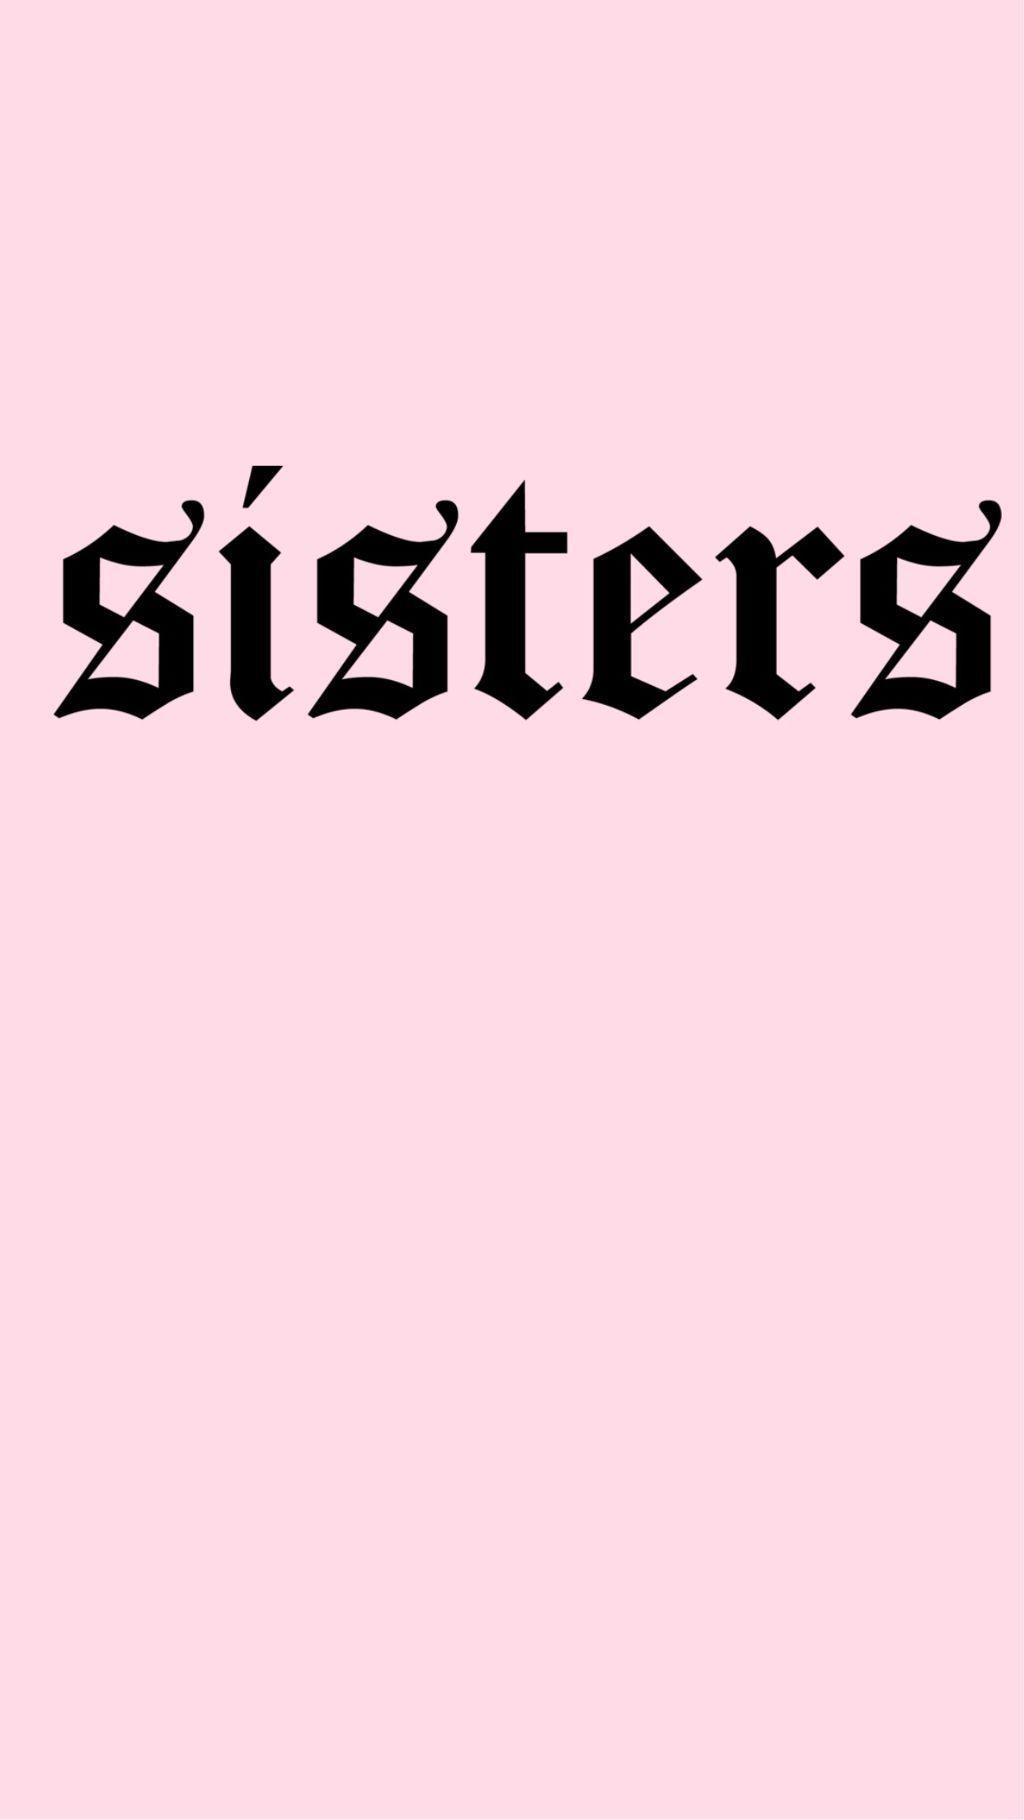 100 Sisters Pictures  Wallpaperscom